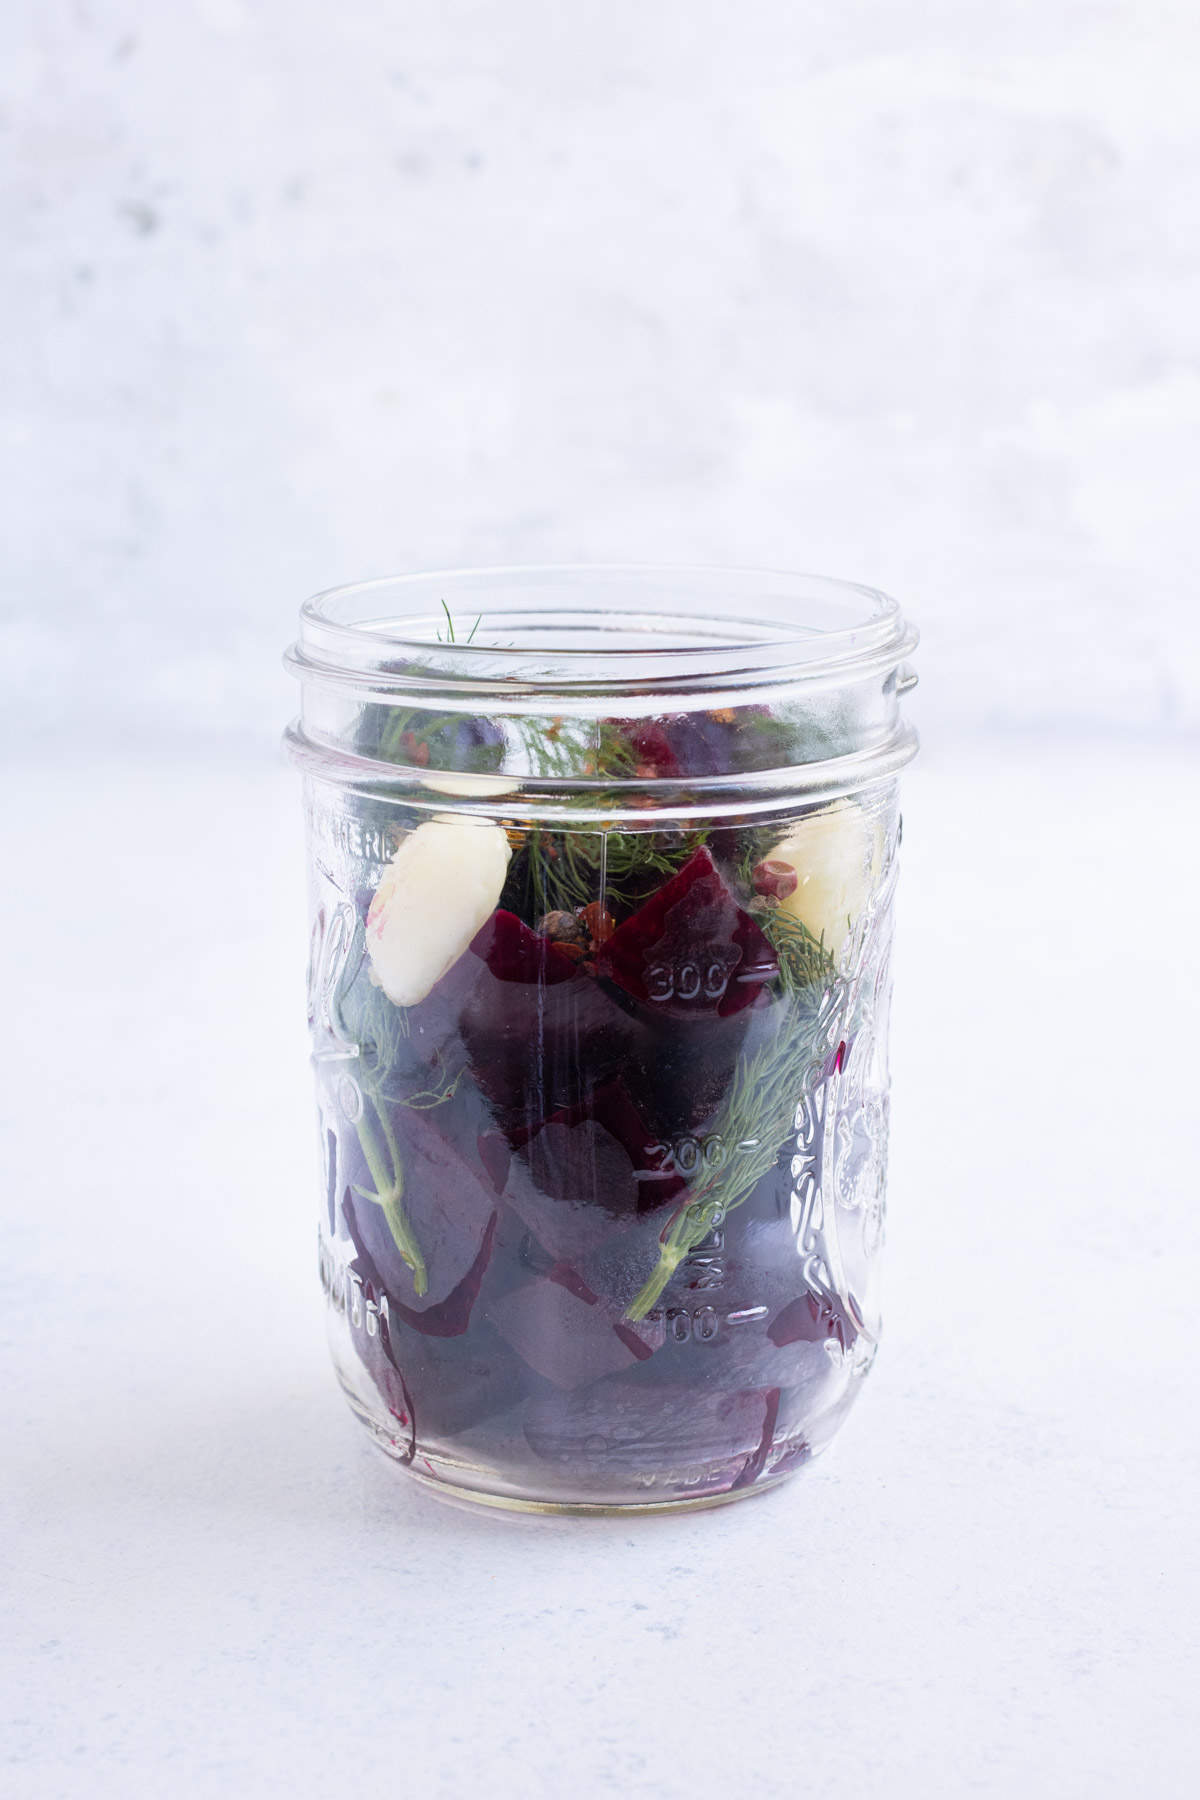 Roasted beets in a jar with garlic, dill, and pepper.